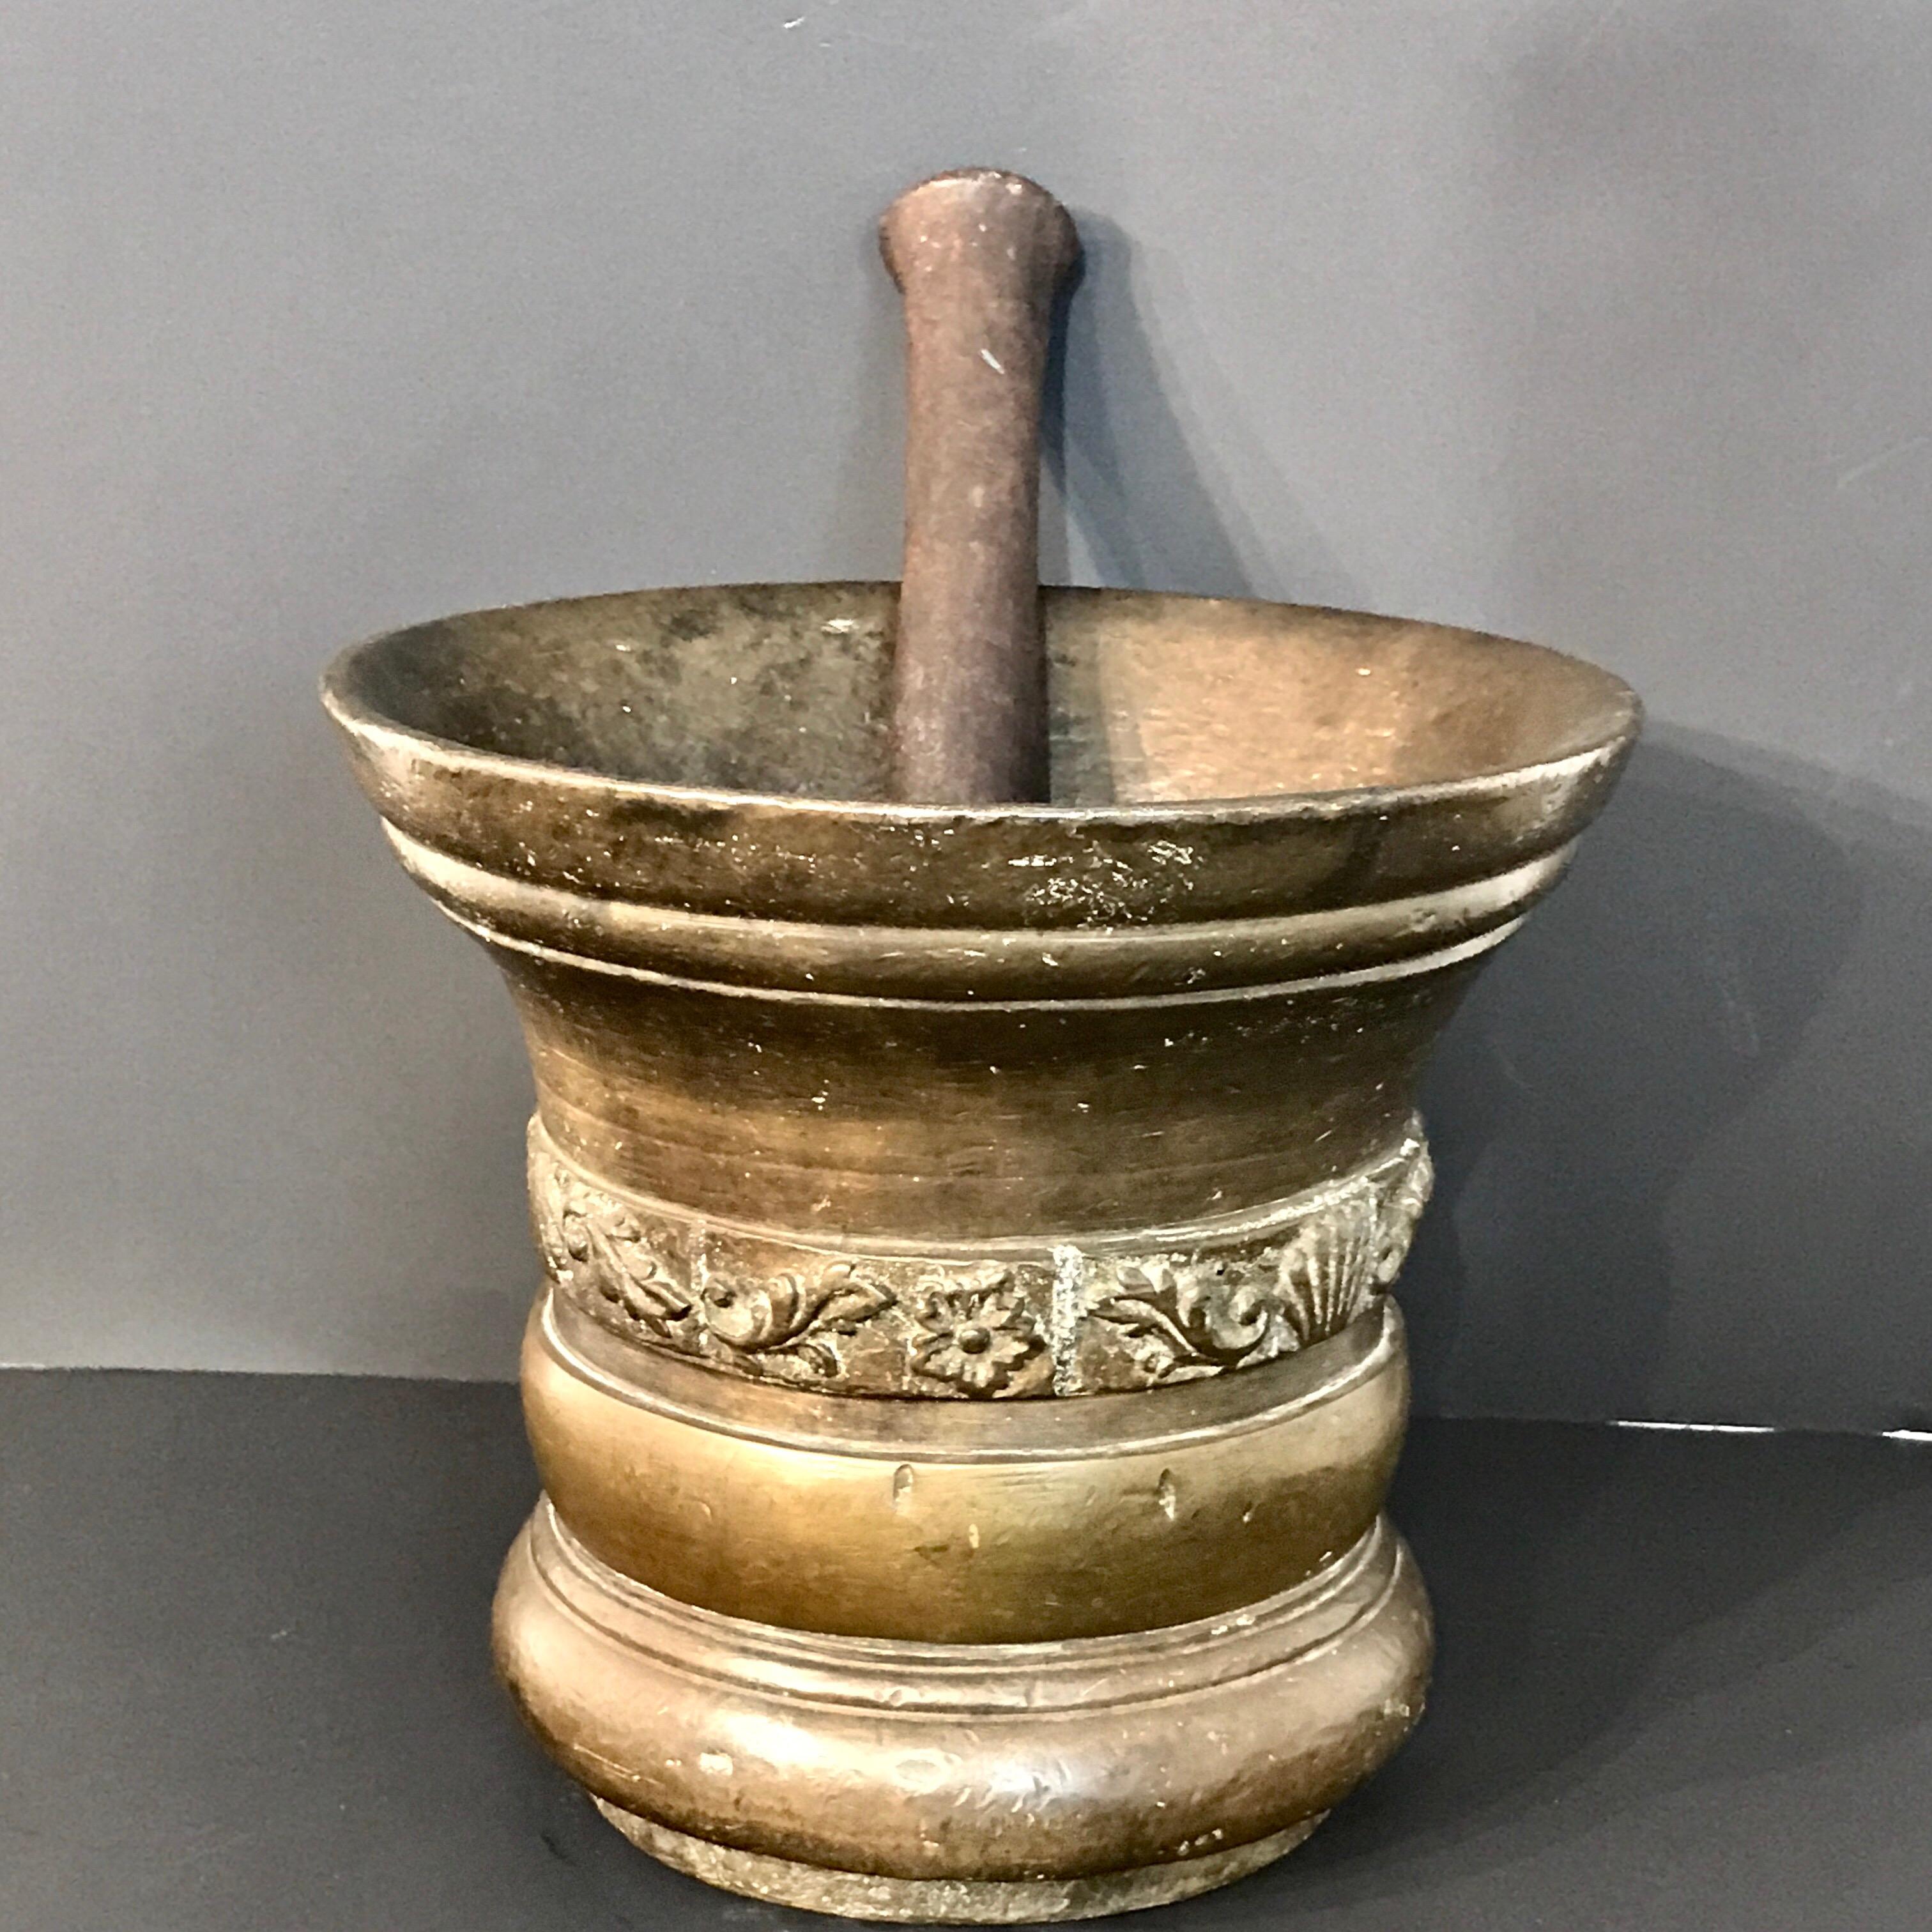 Substantial antique Italian bronze mortar and pestle, finely cast with shell and floral band, complete with 12